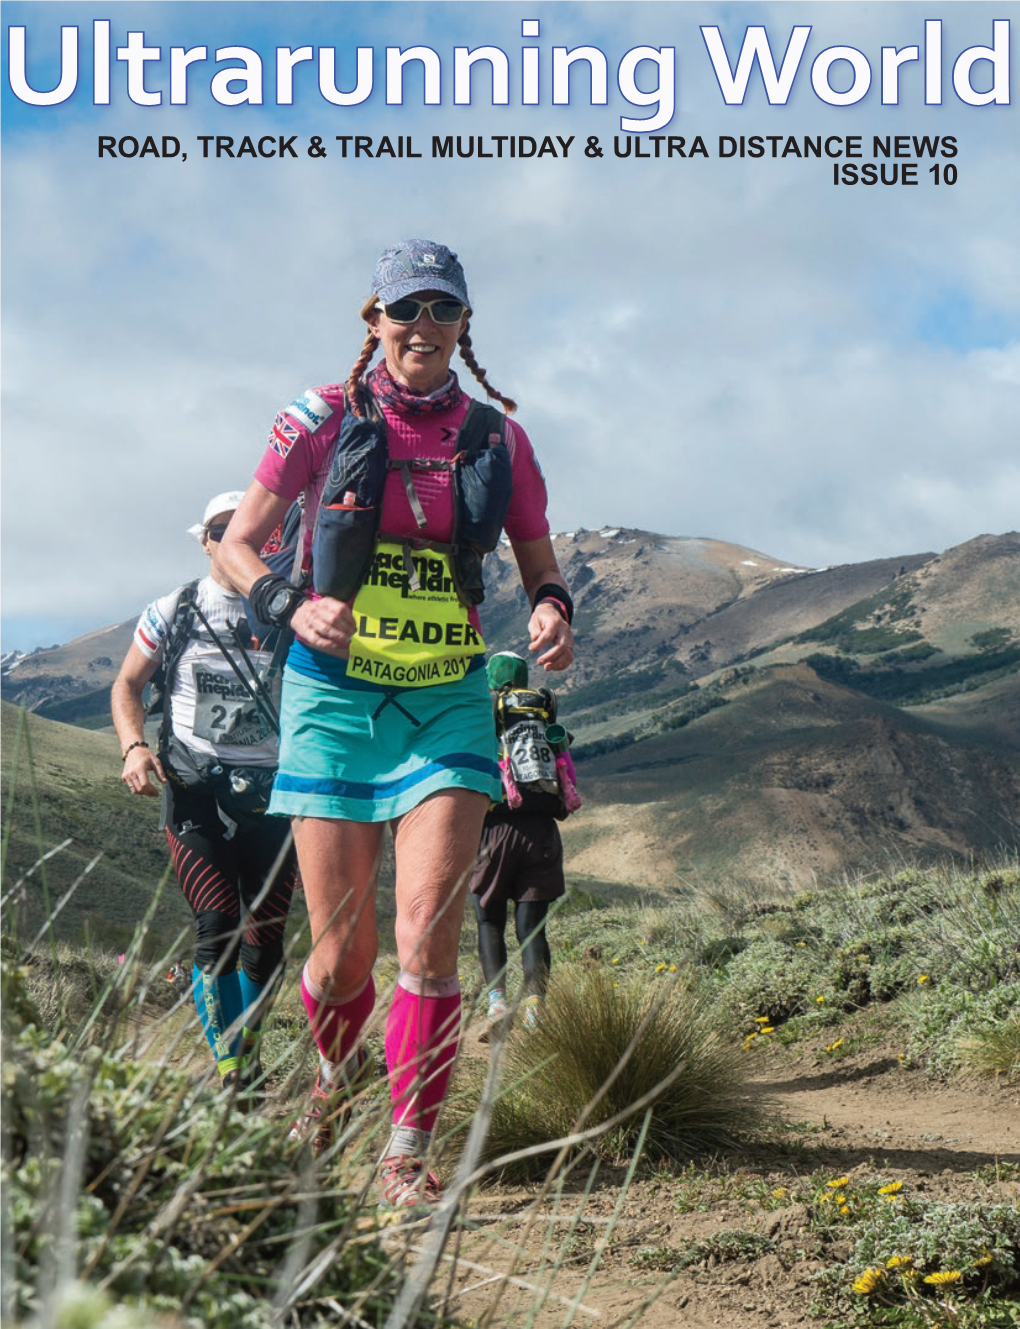 Road, Track & Trail Multiday & Ultra Distance News Issue 10